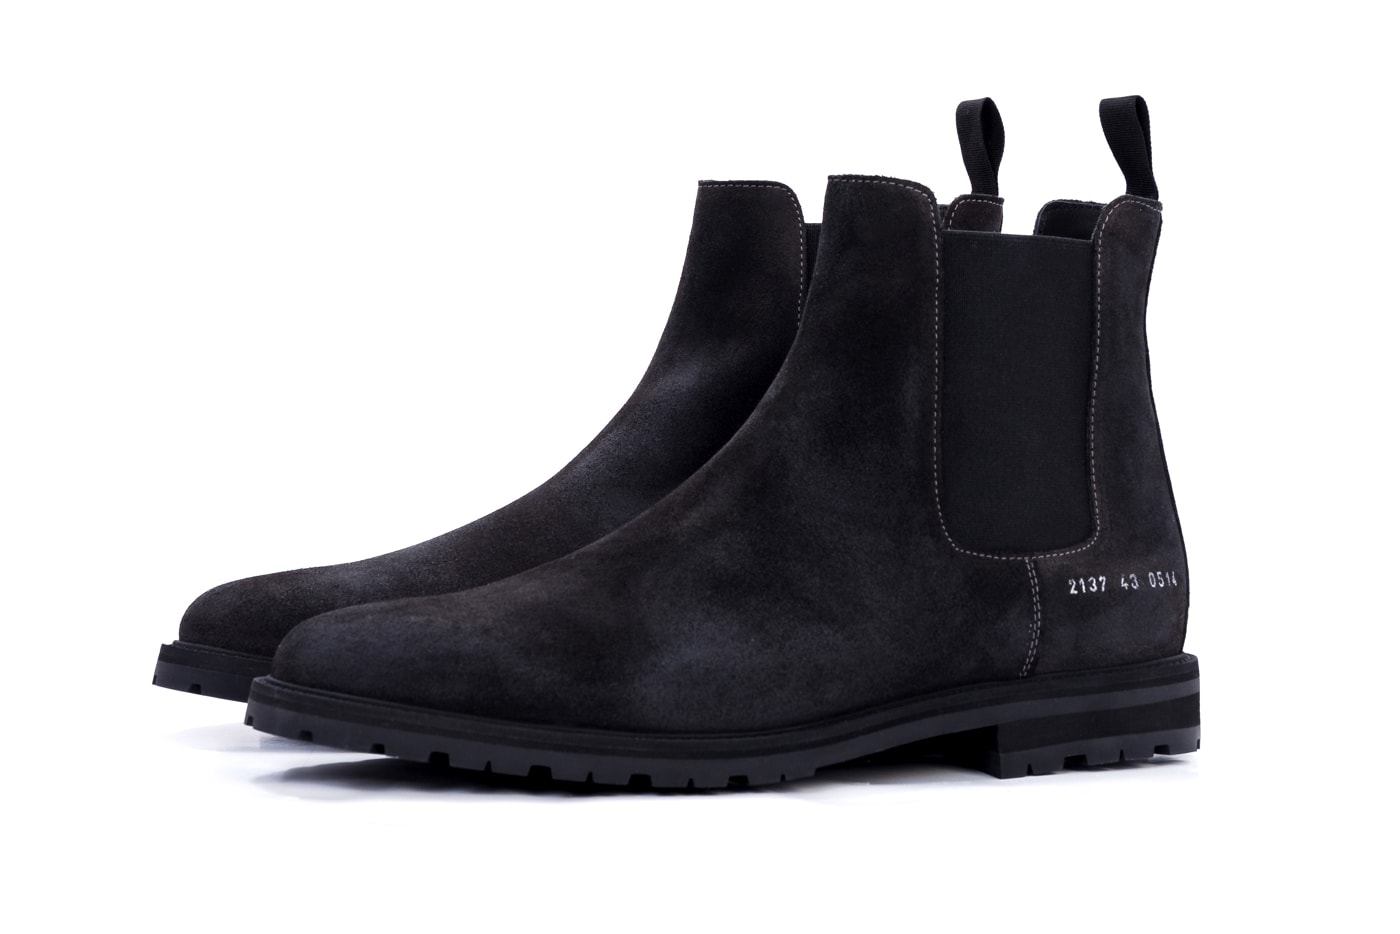 Roden Gray Common Projects Chelsea Boot release info grey suede 10 year anniversary